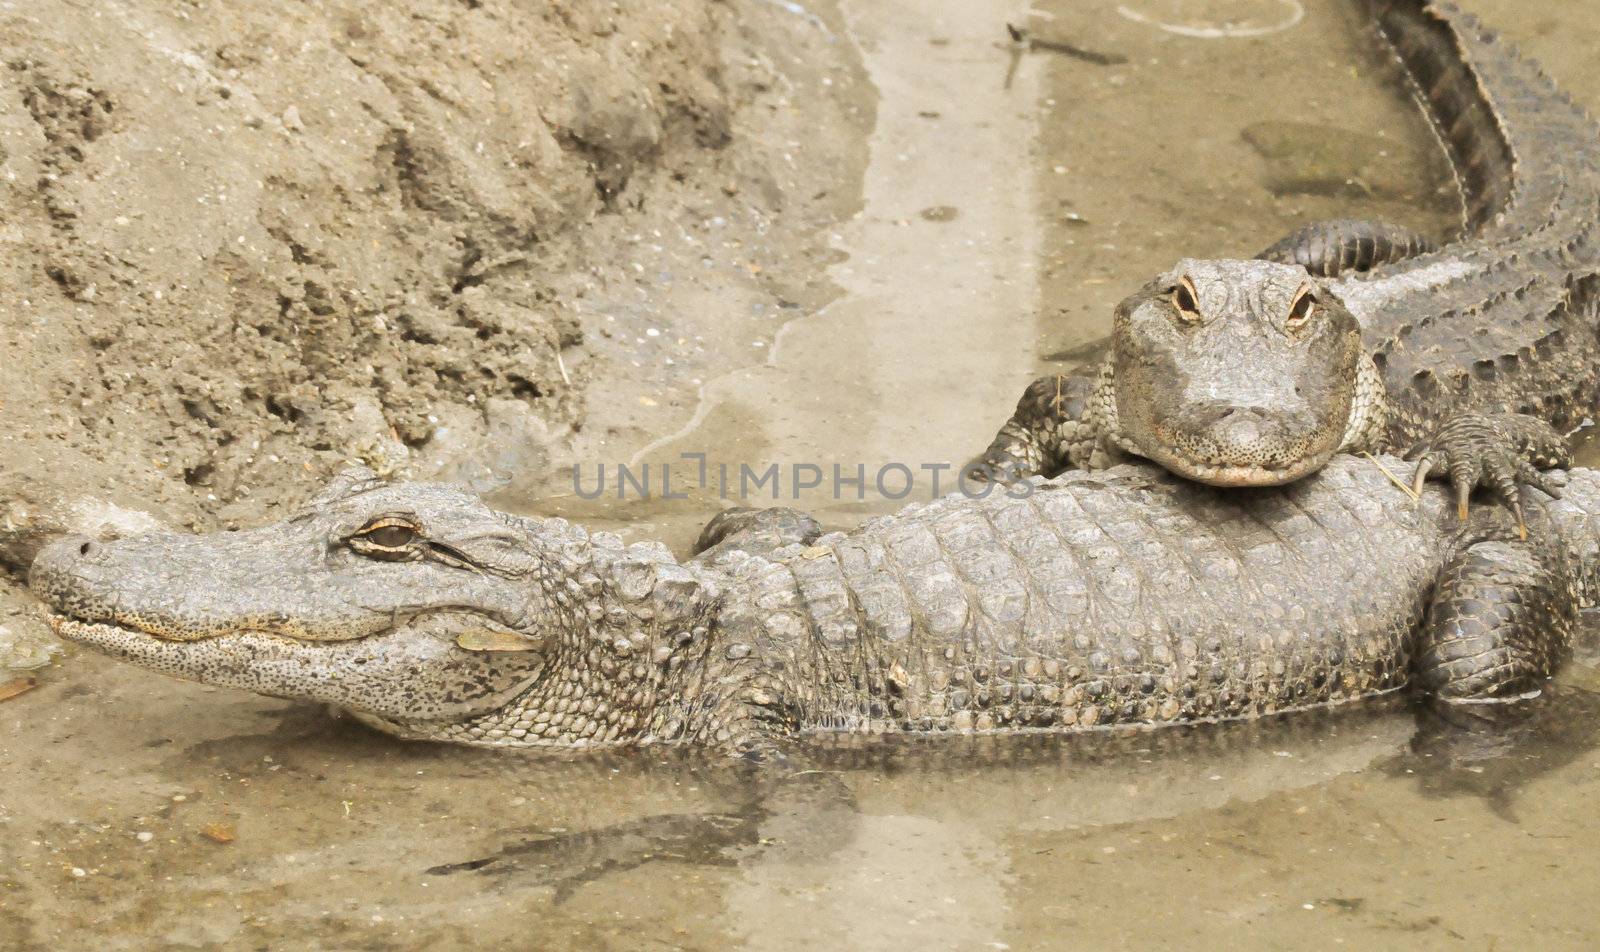 Two Alligators in the water